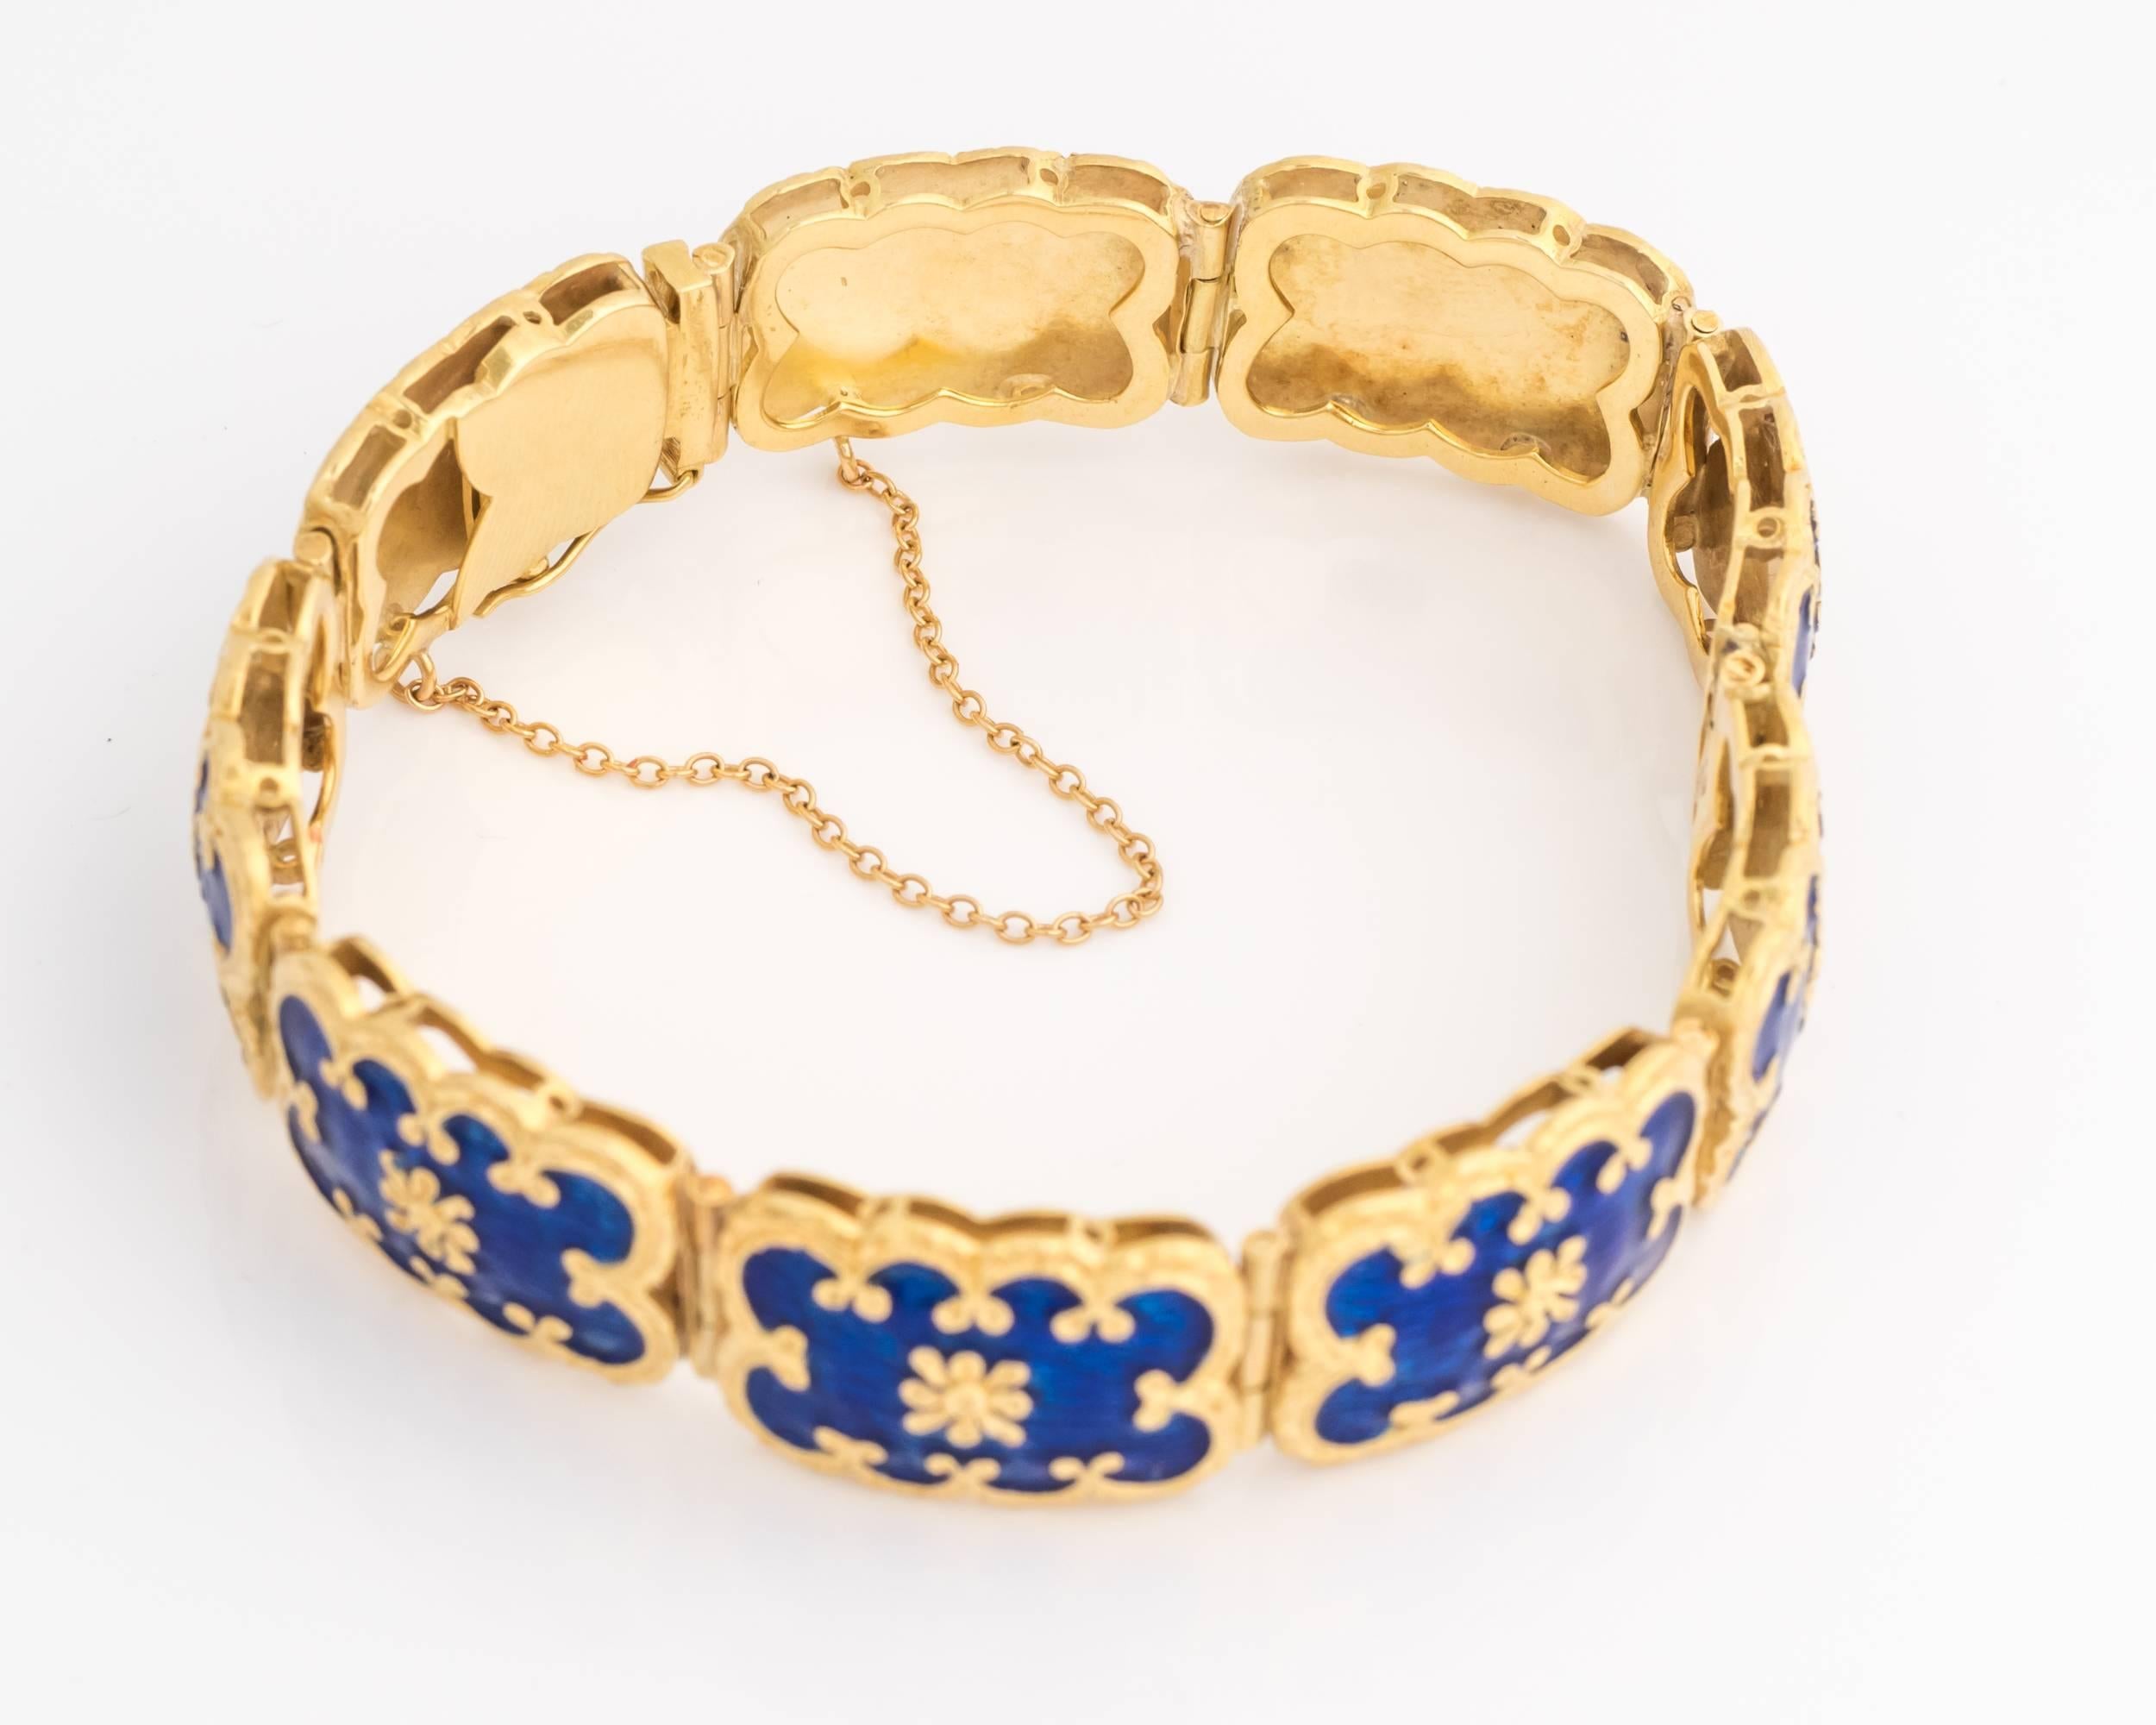 Gorgeous bracelet, made in the 1920s. Crafted in high quality, long-lasting 18k yellow gold, the pattern visible on the bracelet is entirely symmetrical, true to it's deco age. Bright blue enamel features elegant color play, creating an appearance